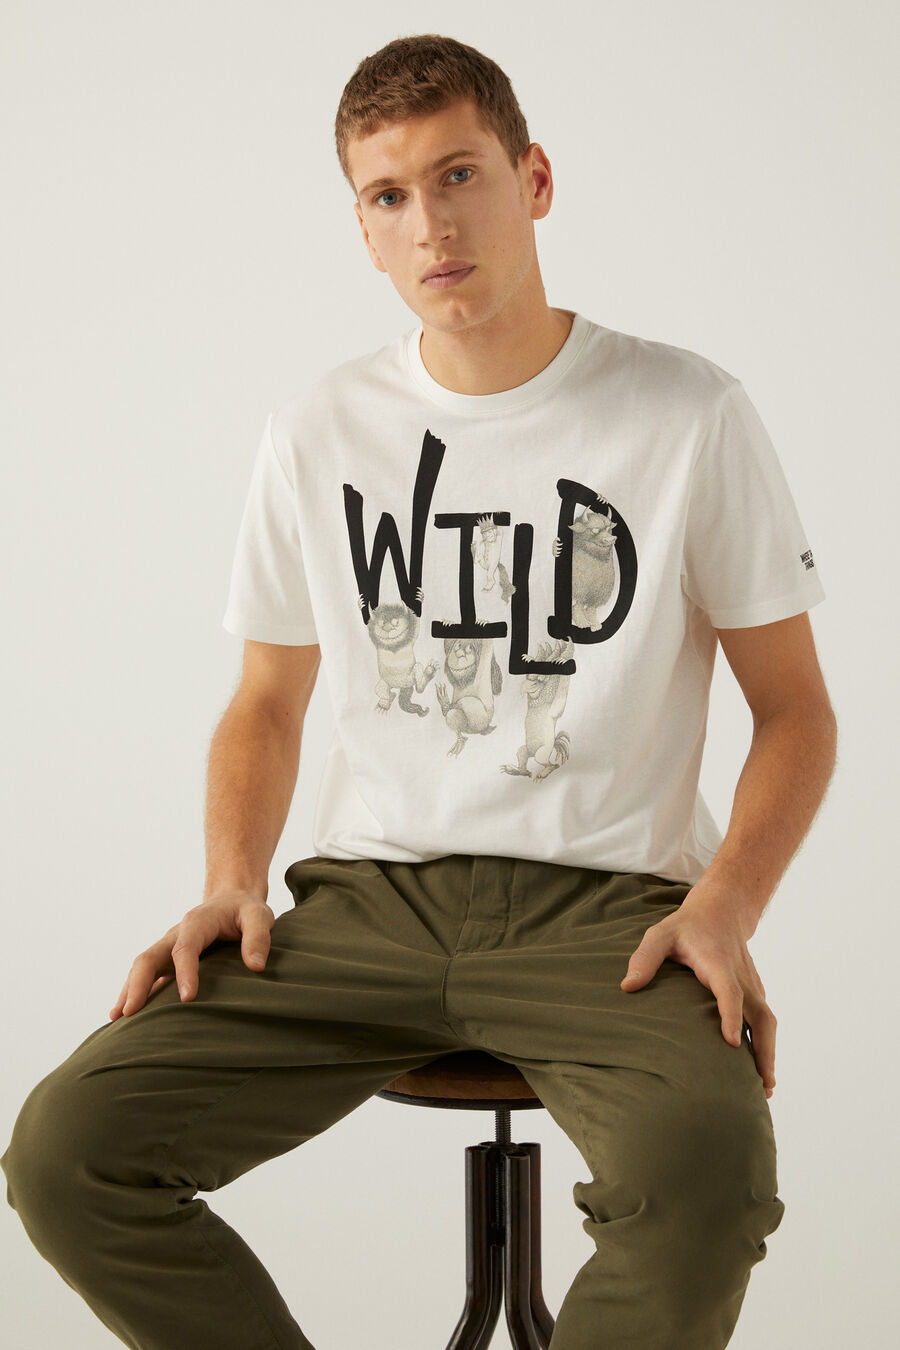 T-shirt wild things are